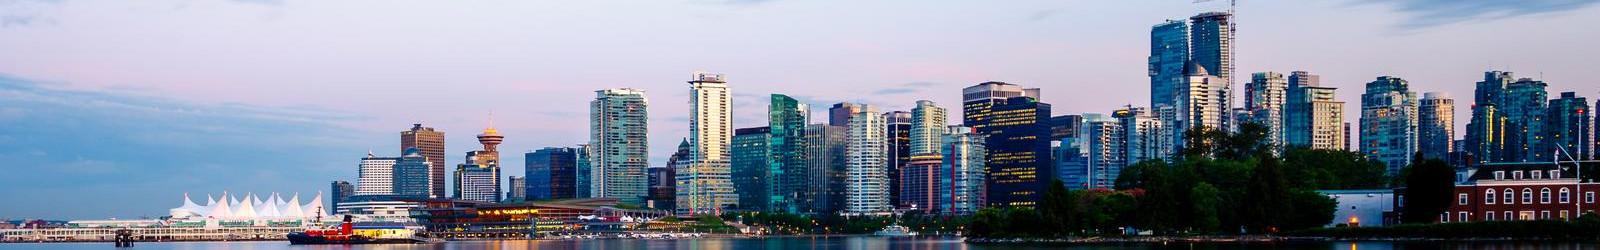 Gambling therapists in Vancouver, British Columbia